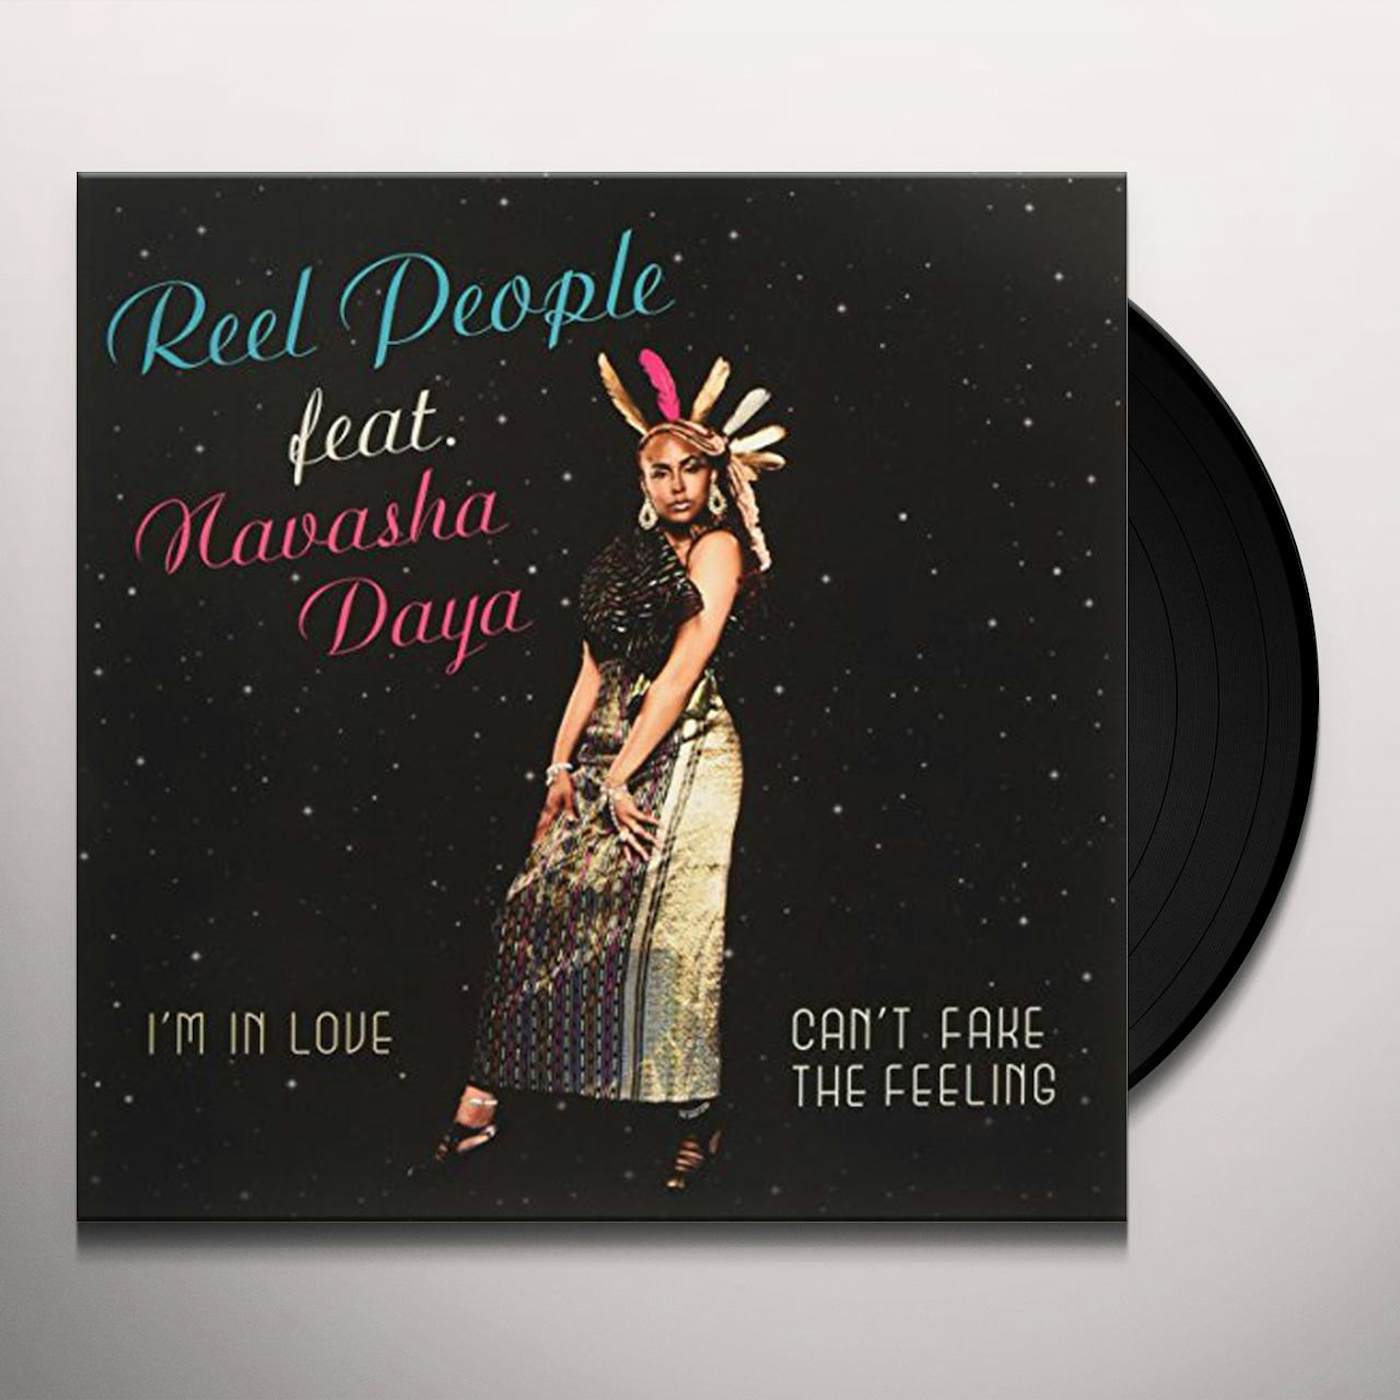 Reel People I'm in Love / Can't Fake the Feeling Vinyl Record